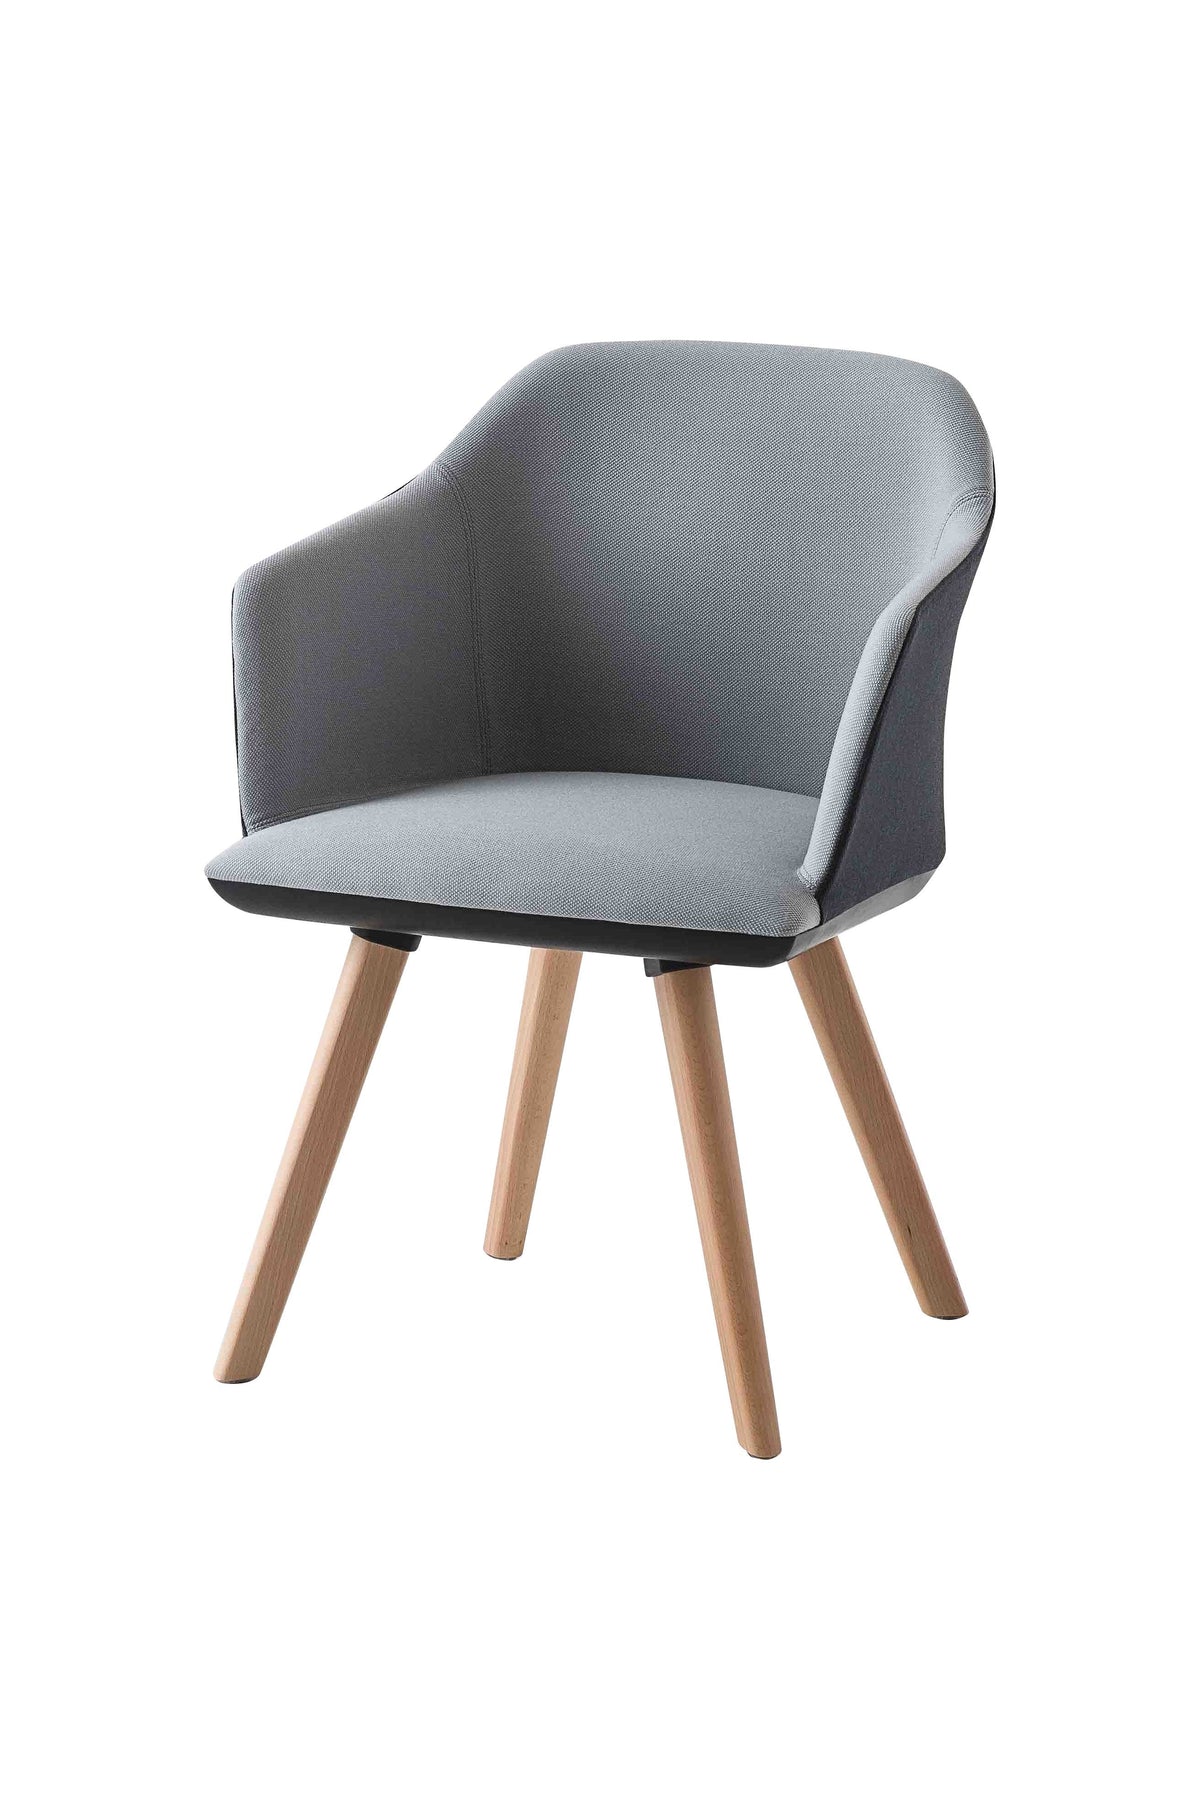 Manaa Armchair c/w Wood Legs-Gaber-Contract Furniture Store